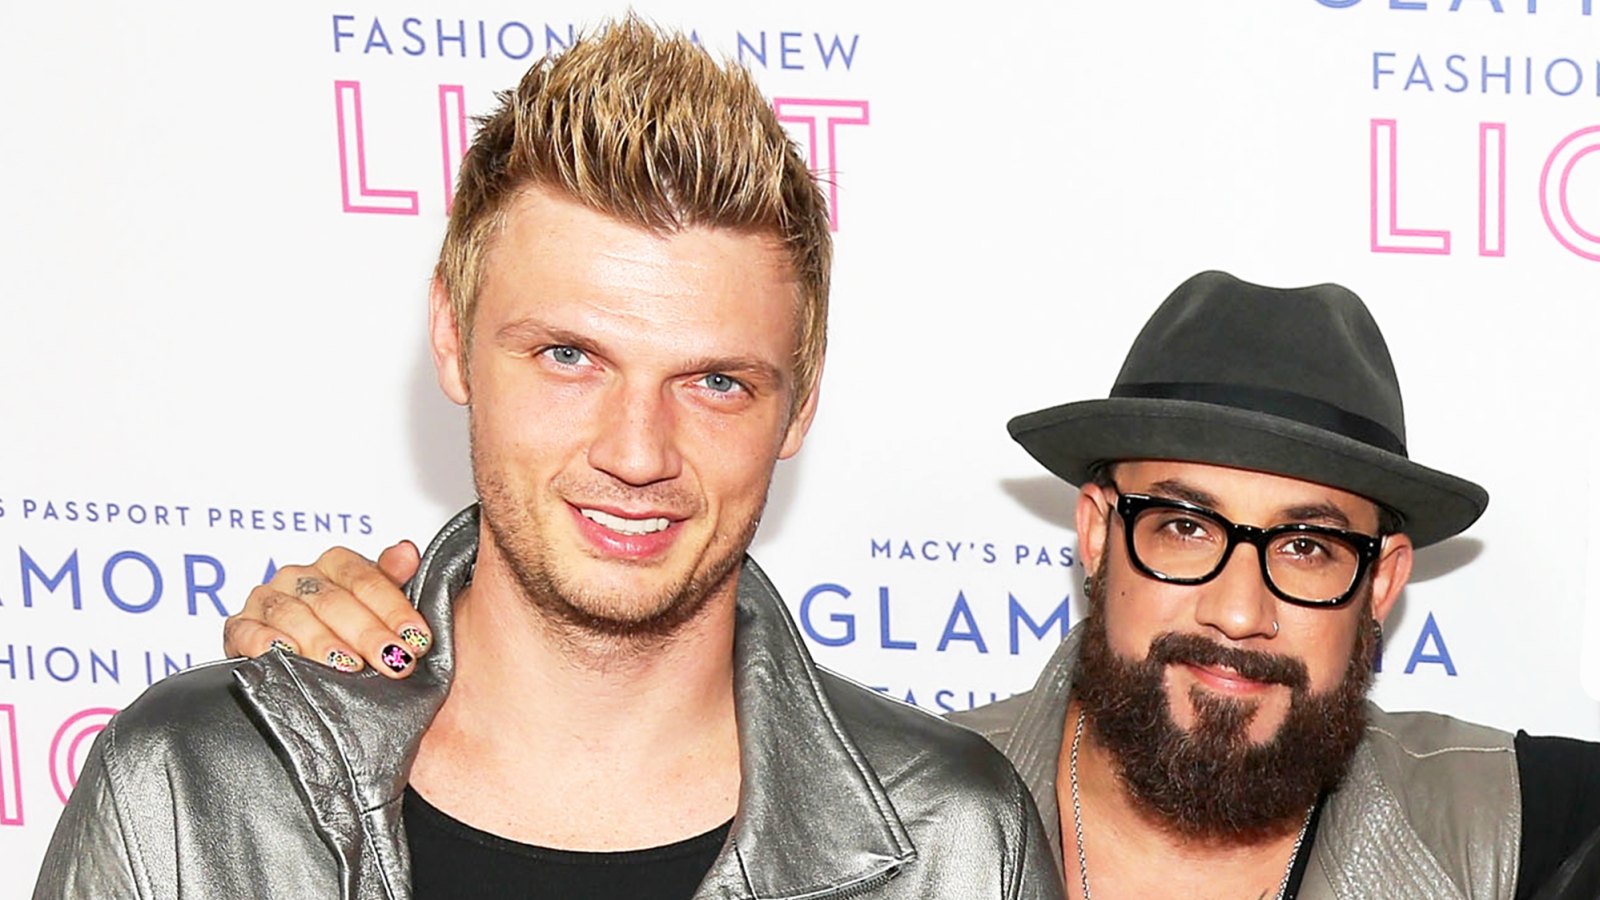 Nick Carter and AJ McLean of Backstreet Boys attend Glamorama presented by Macy's Passport at Orpheum Theatre in Los Angeles, California.